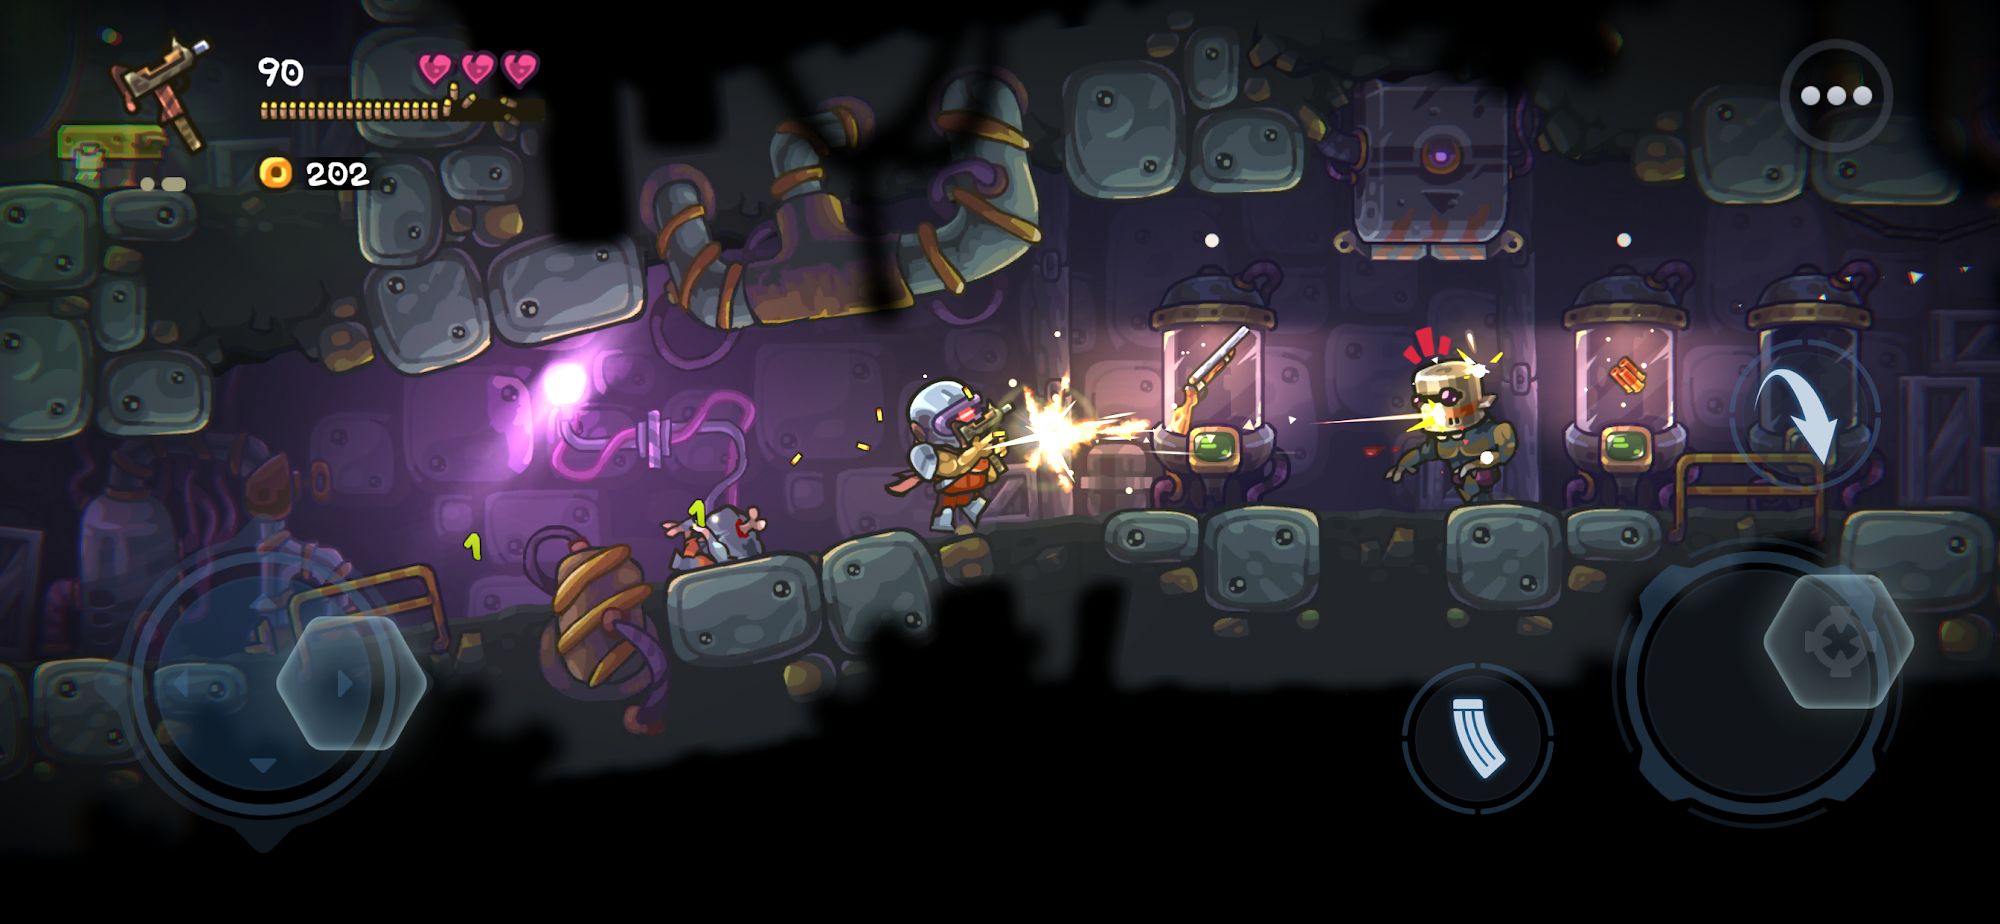 Zombotron Re-Boot - Android game screenshots.